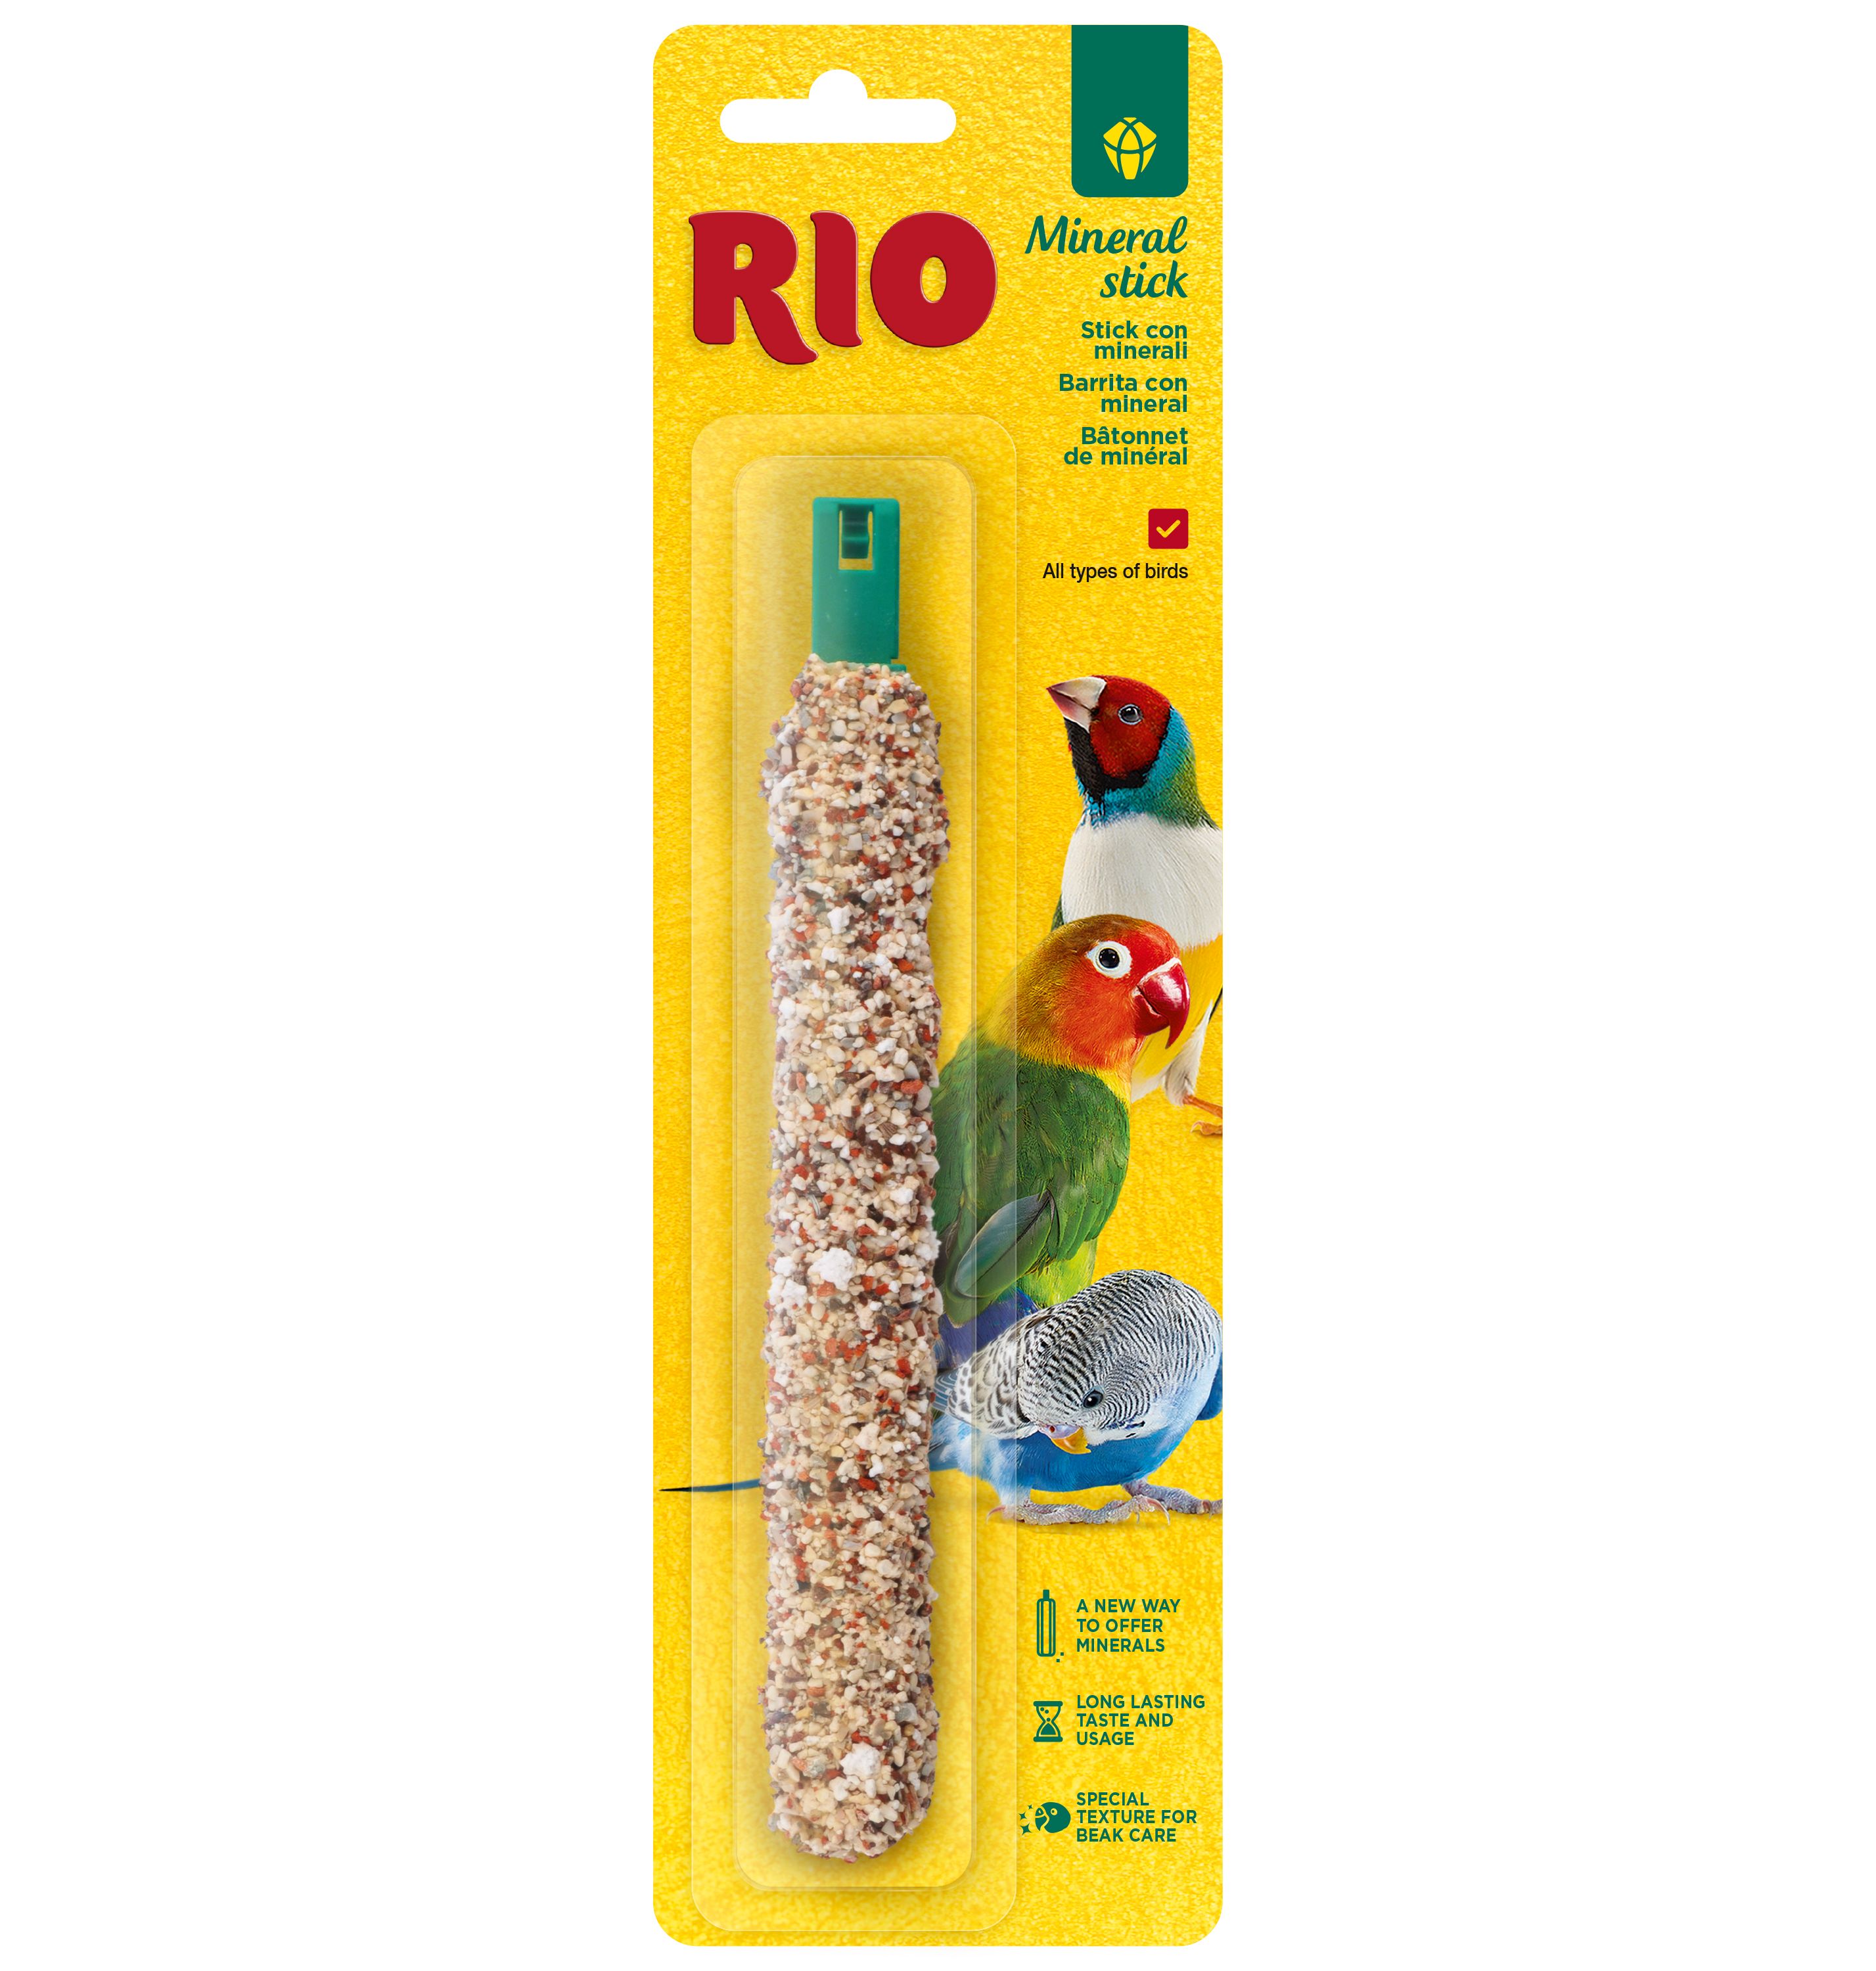 RIO Mineral stick for all types of birds